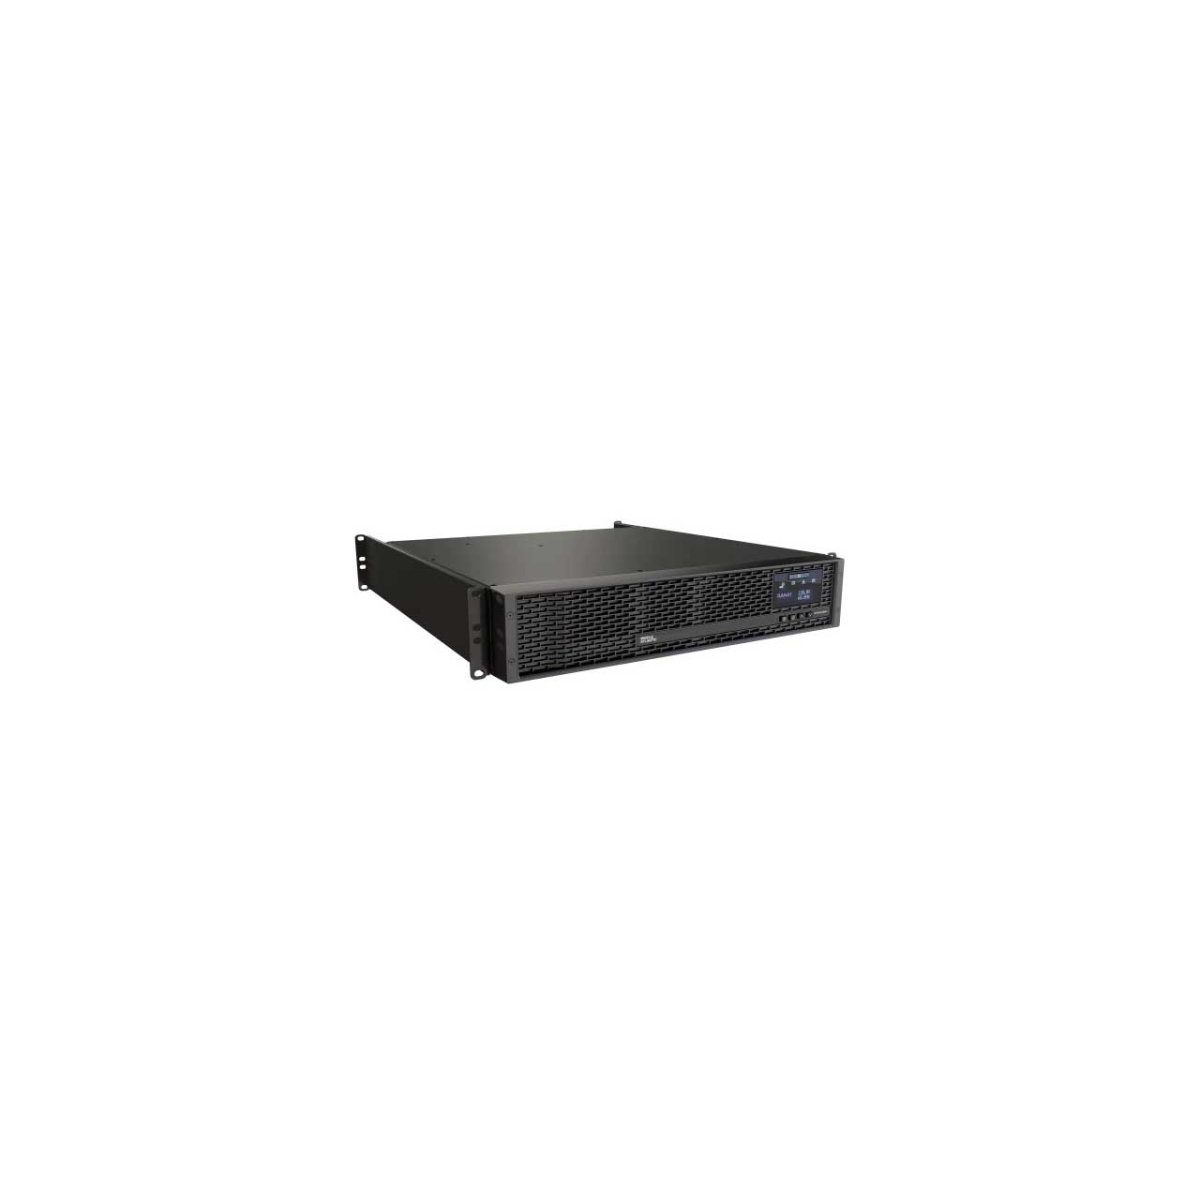 Picture of Middle Atlantic Products MAPUPXRLNK1000R2 UPX-RLNK-1000R-2 - 1000 VA 15A UPS Backup Power System with RackLink - Bank Outlet Control